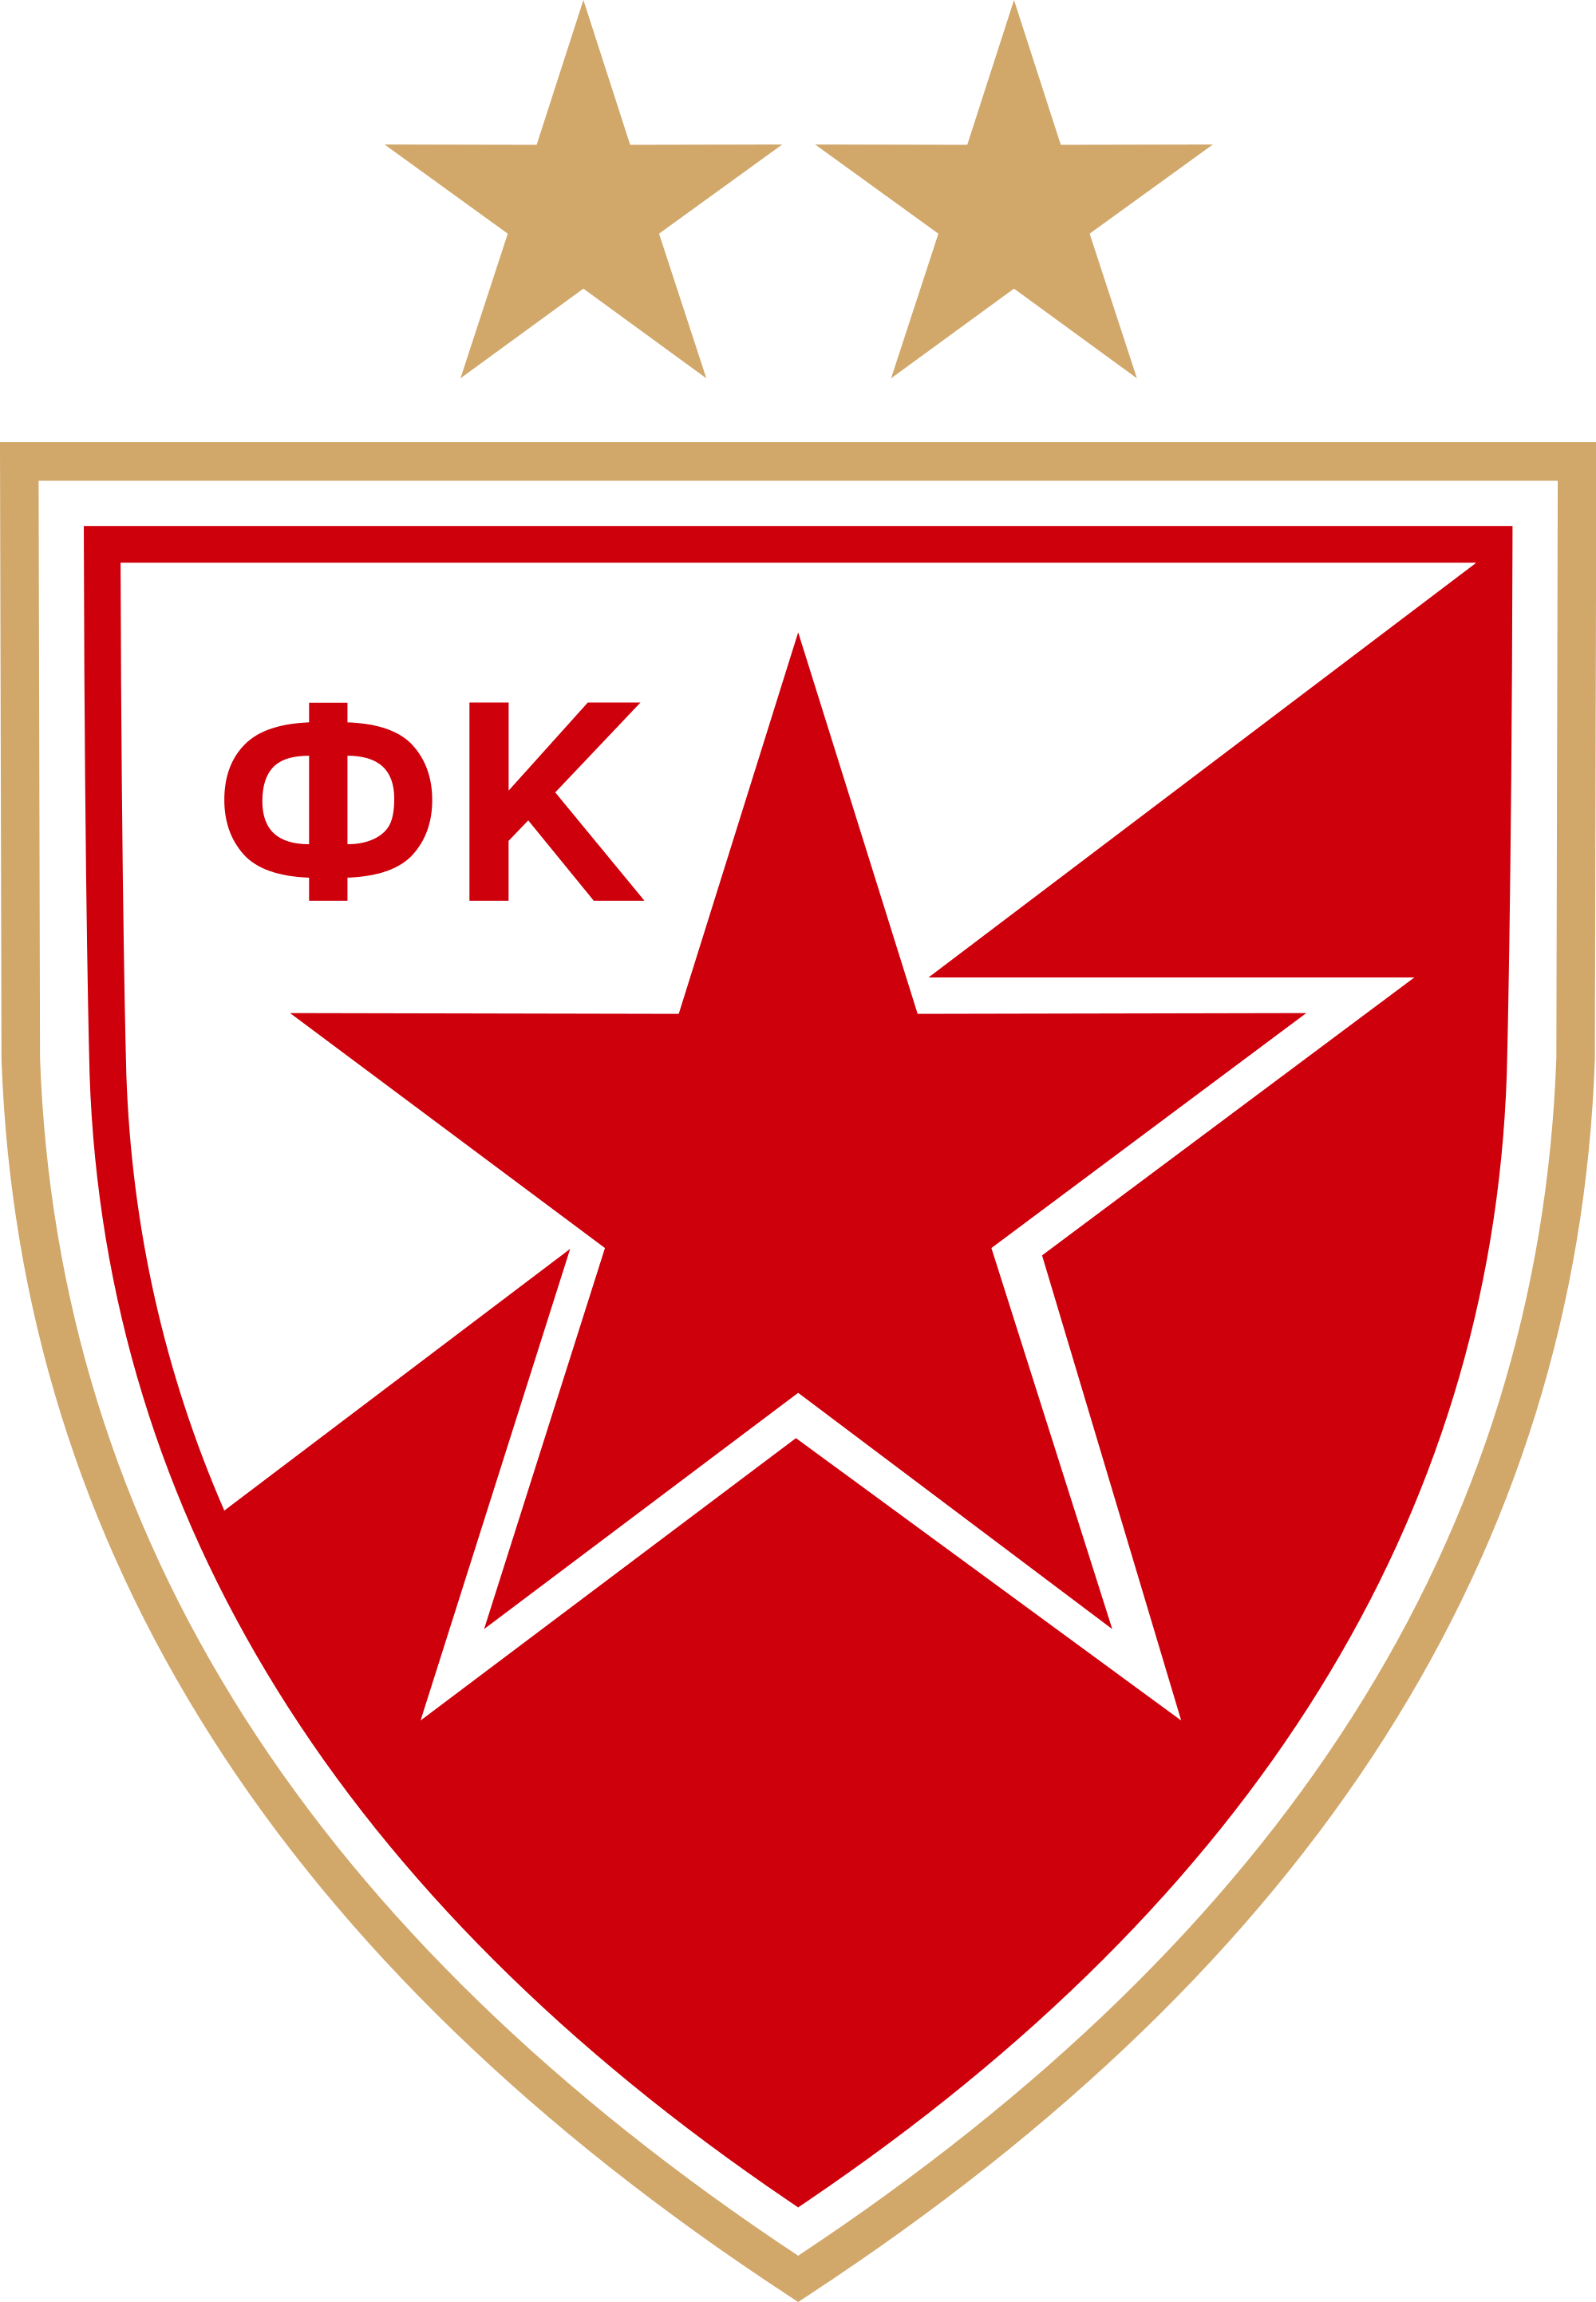 Free Red Star Picture, Download Free Clip Art, Free Clip Art